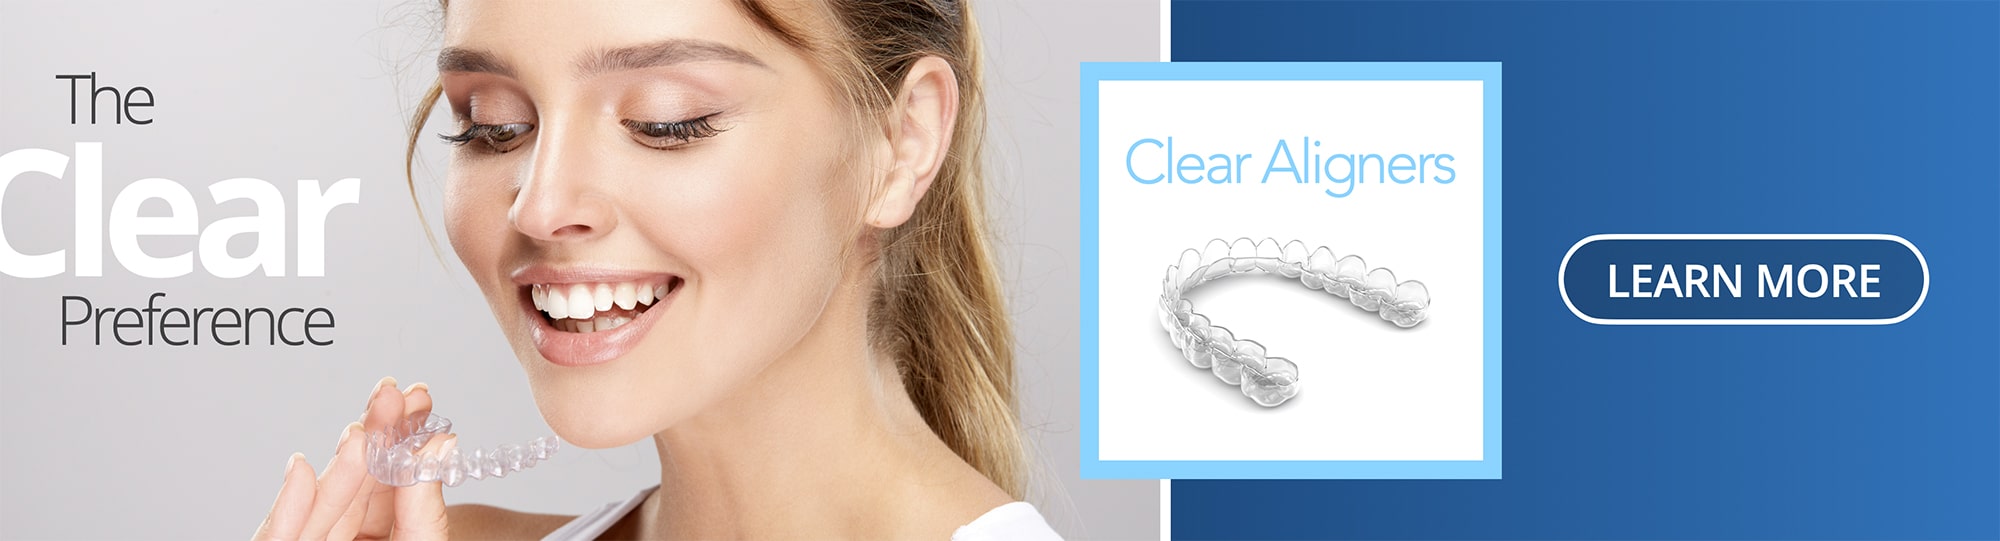 2024-aligners learn more image